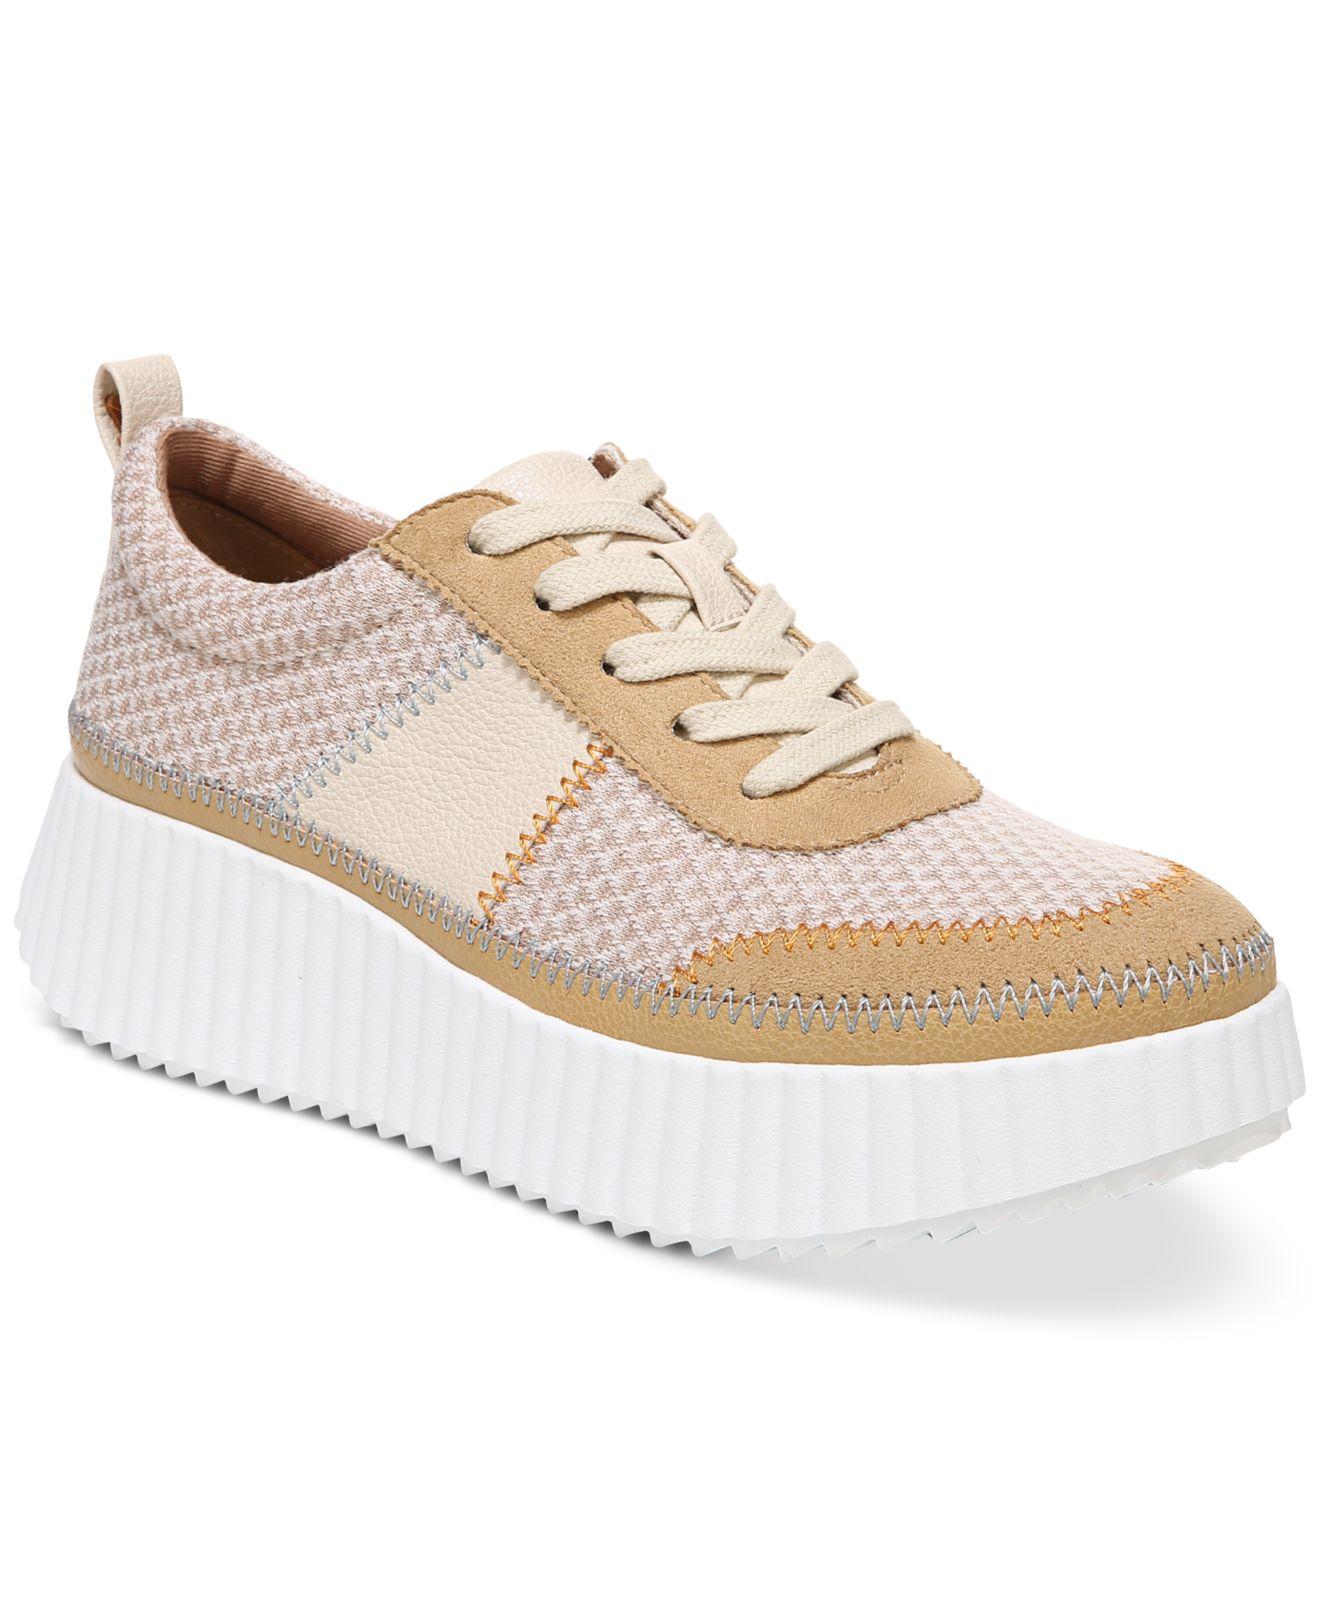 Zodiac Cooper Lace-up Platform Sneakers in White | Lyst